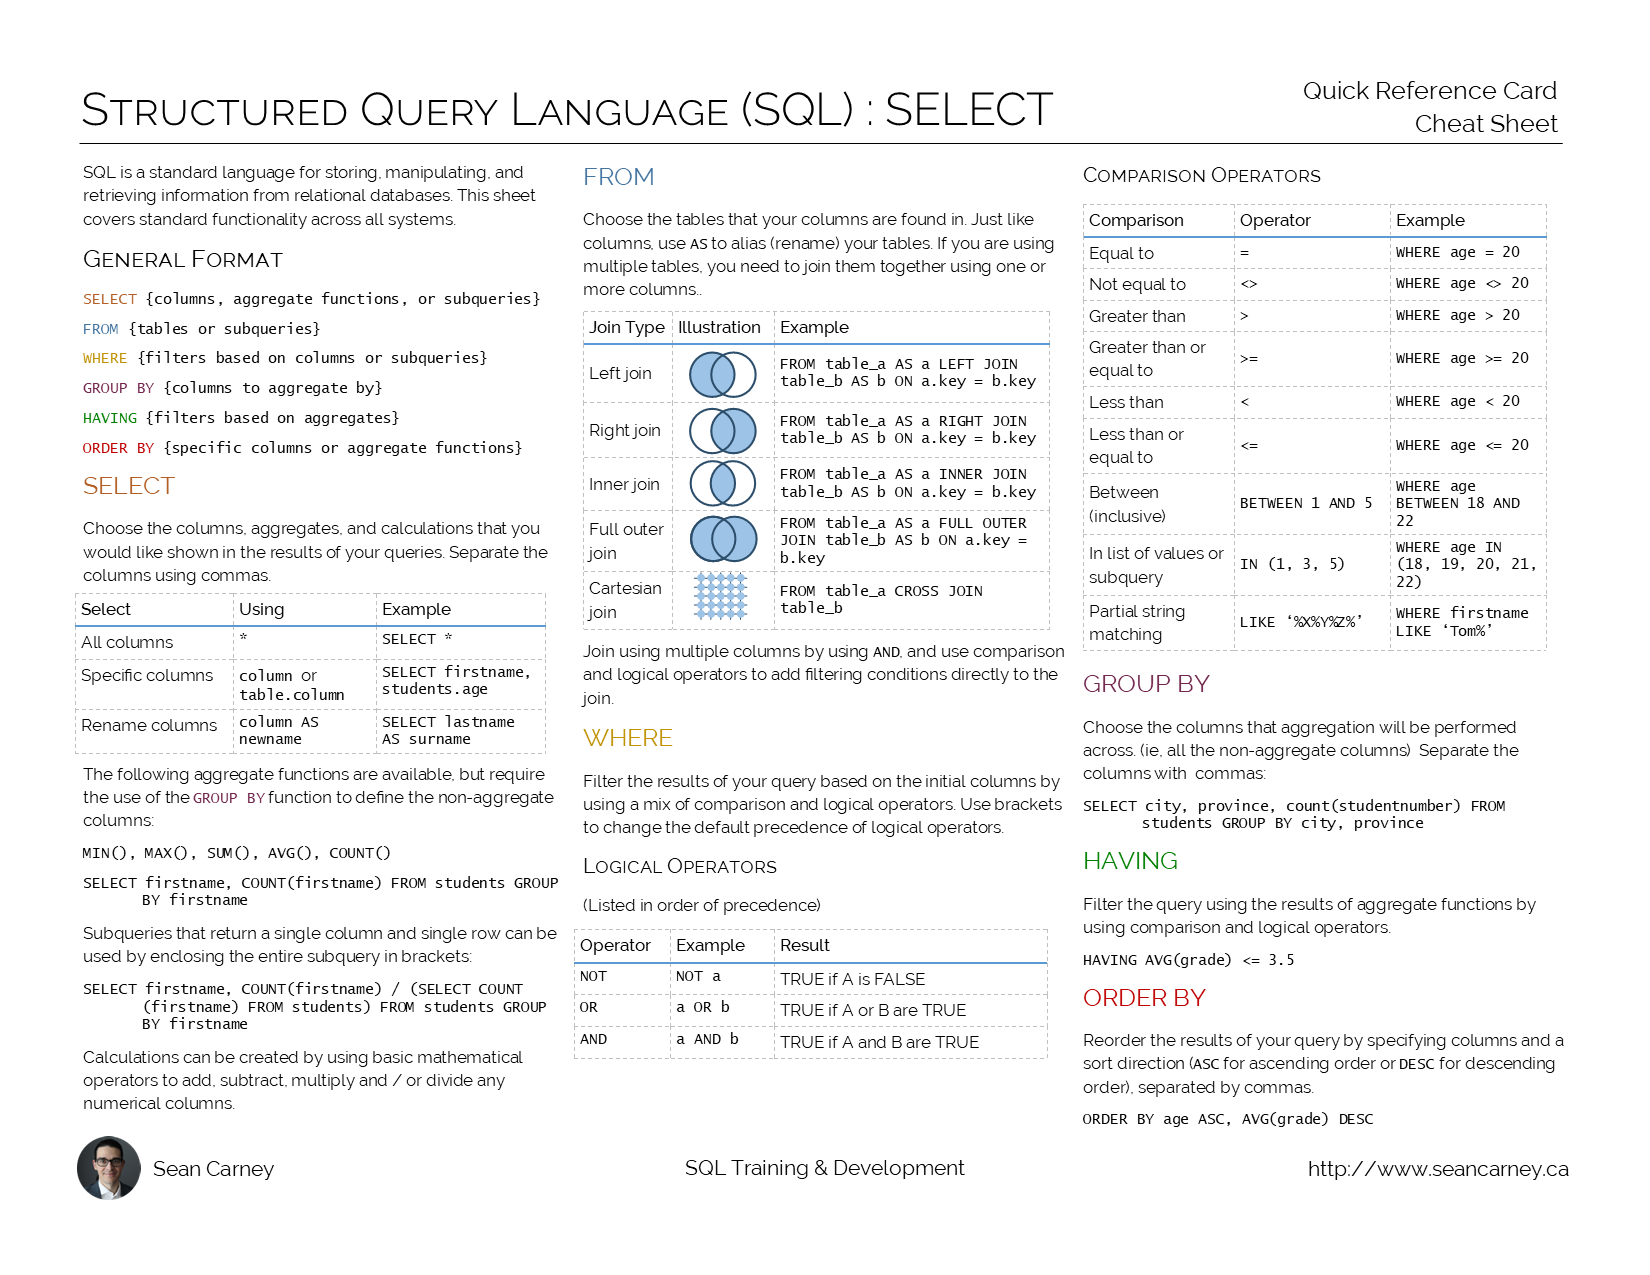 SQL Cheat Sheet Quick Reference Guide